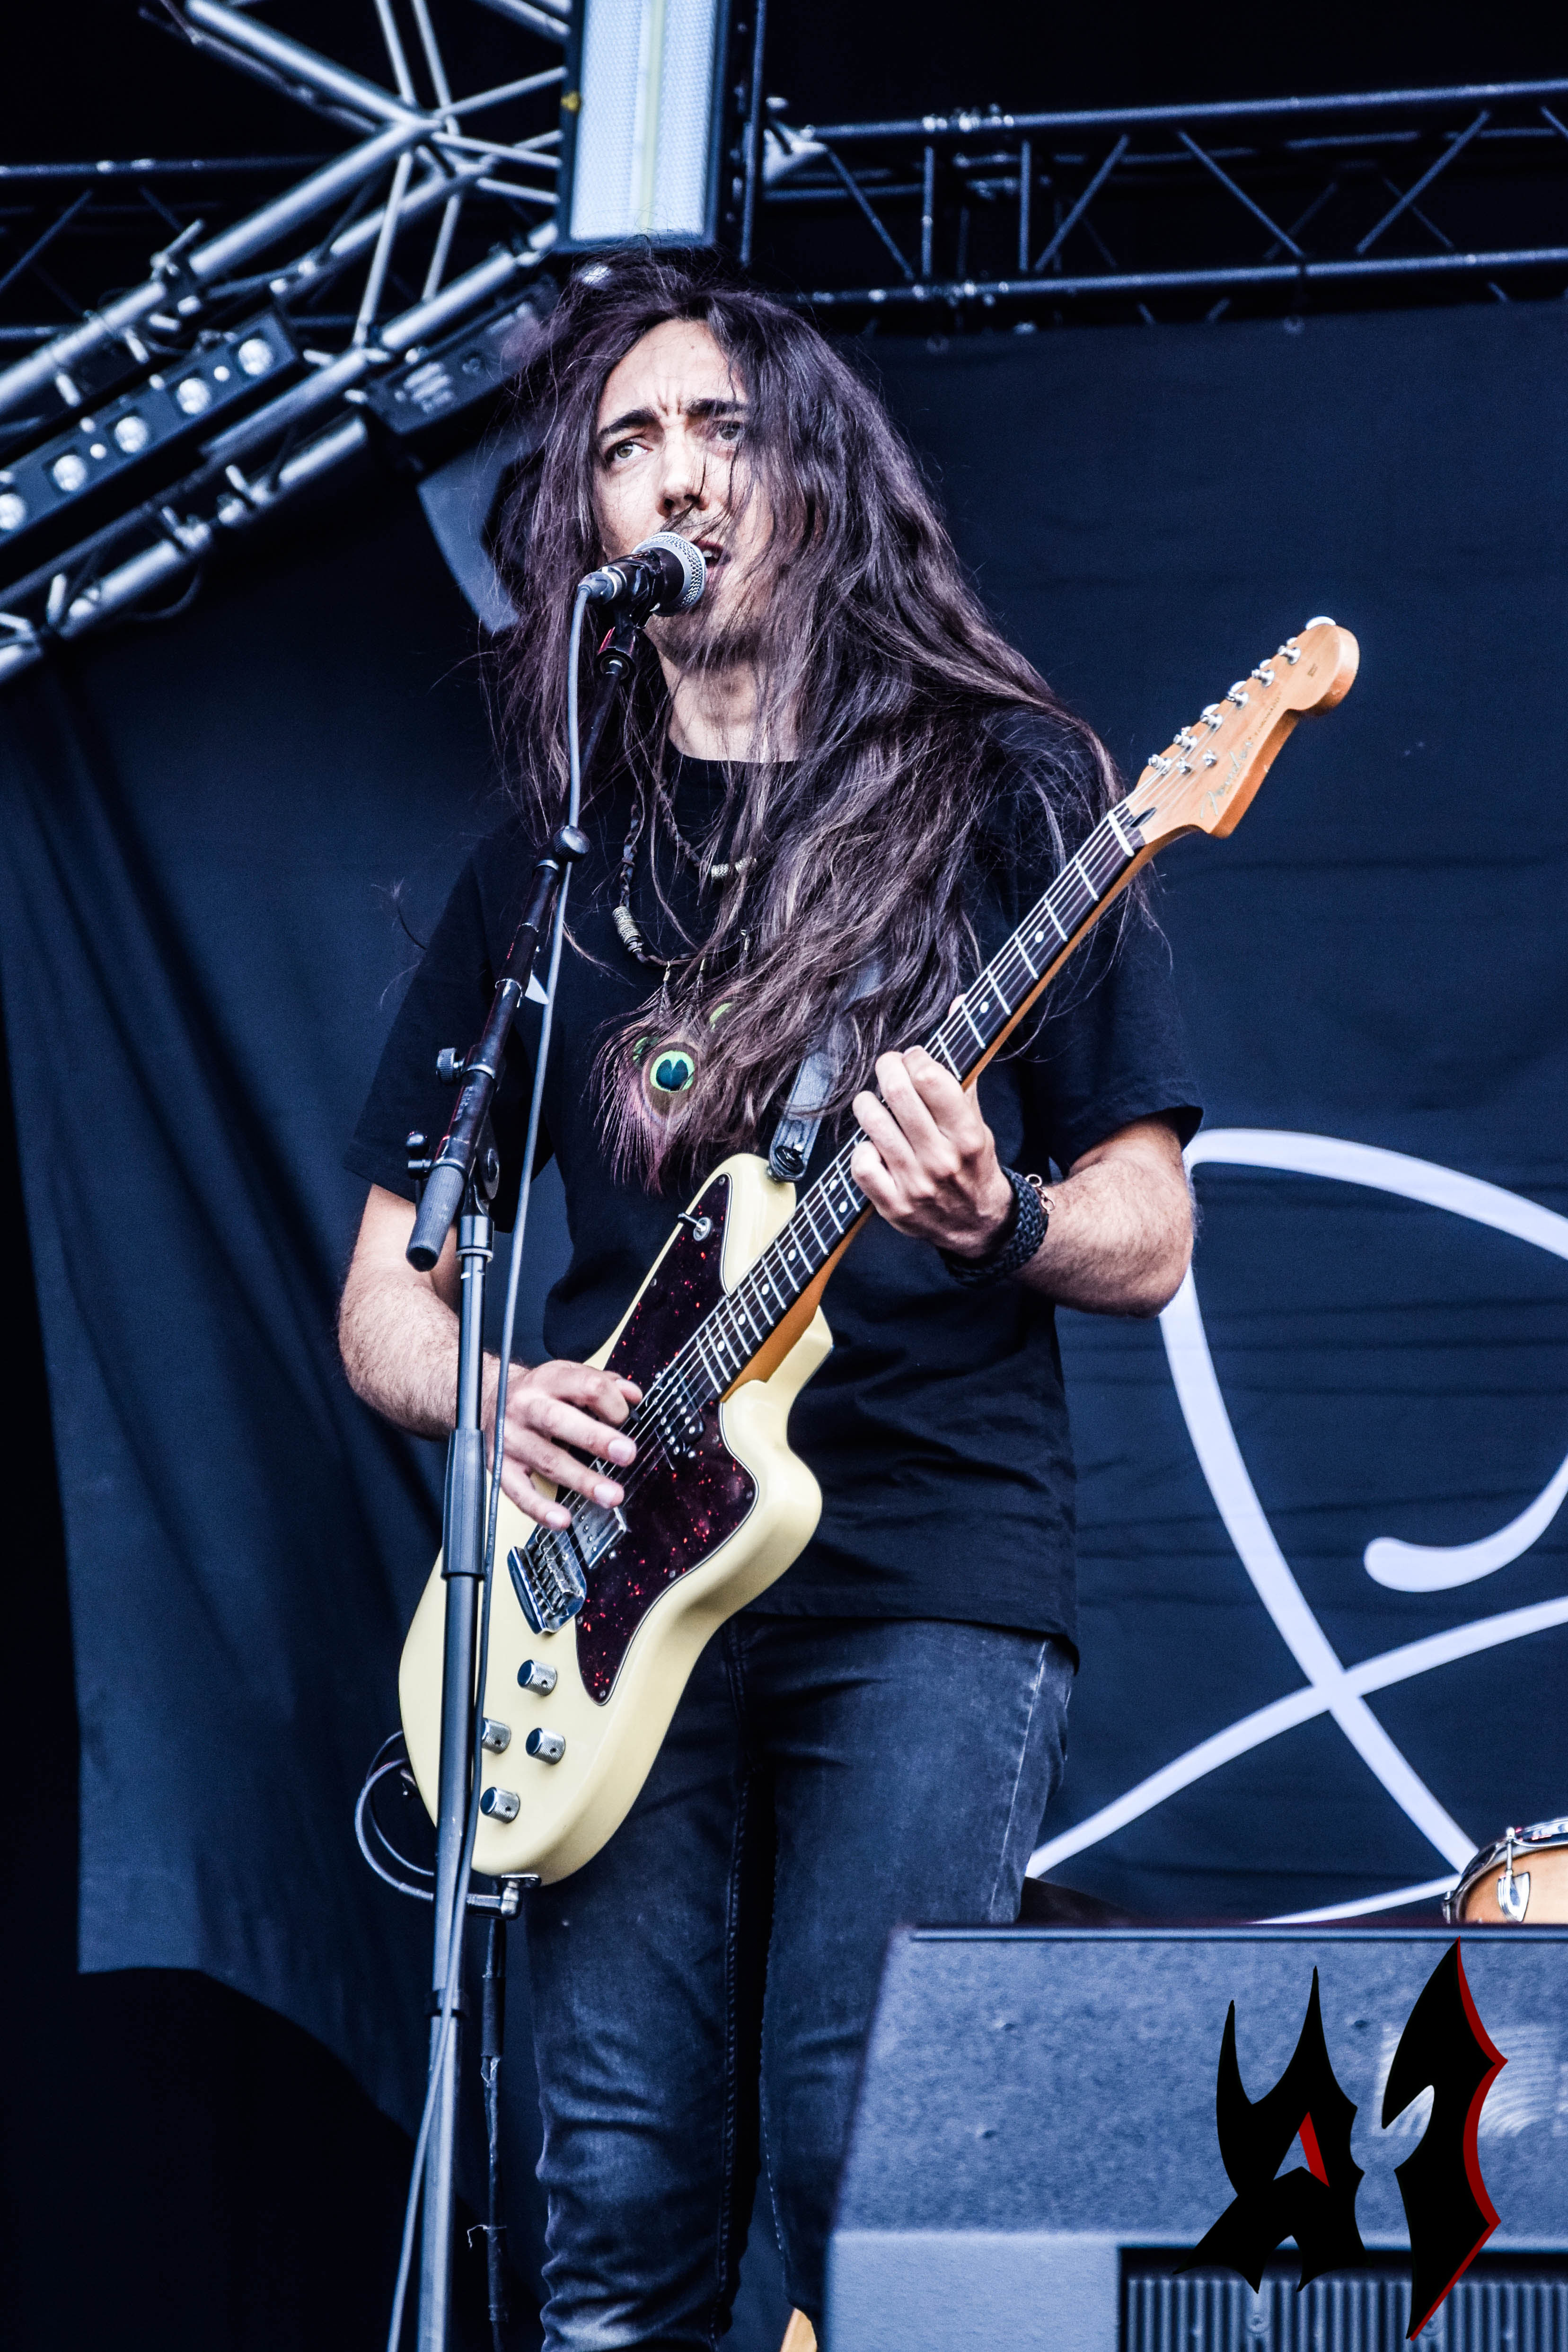 Donwload 2018 – Day 2 - Alcest 3